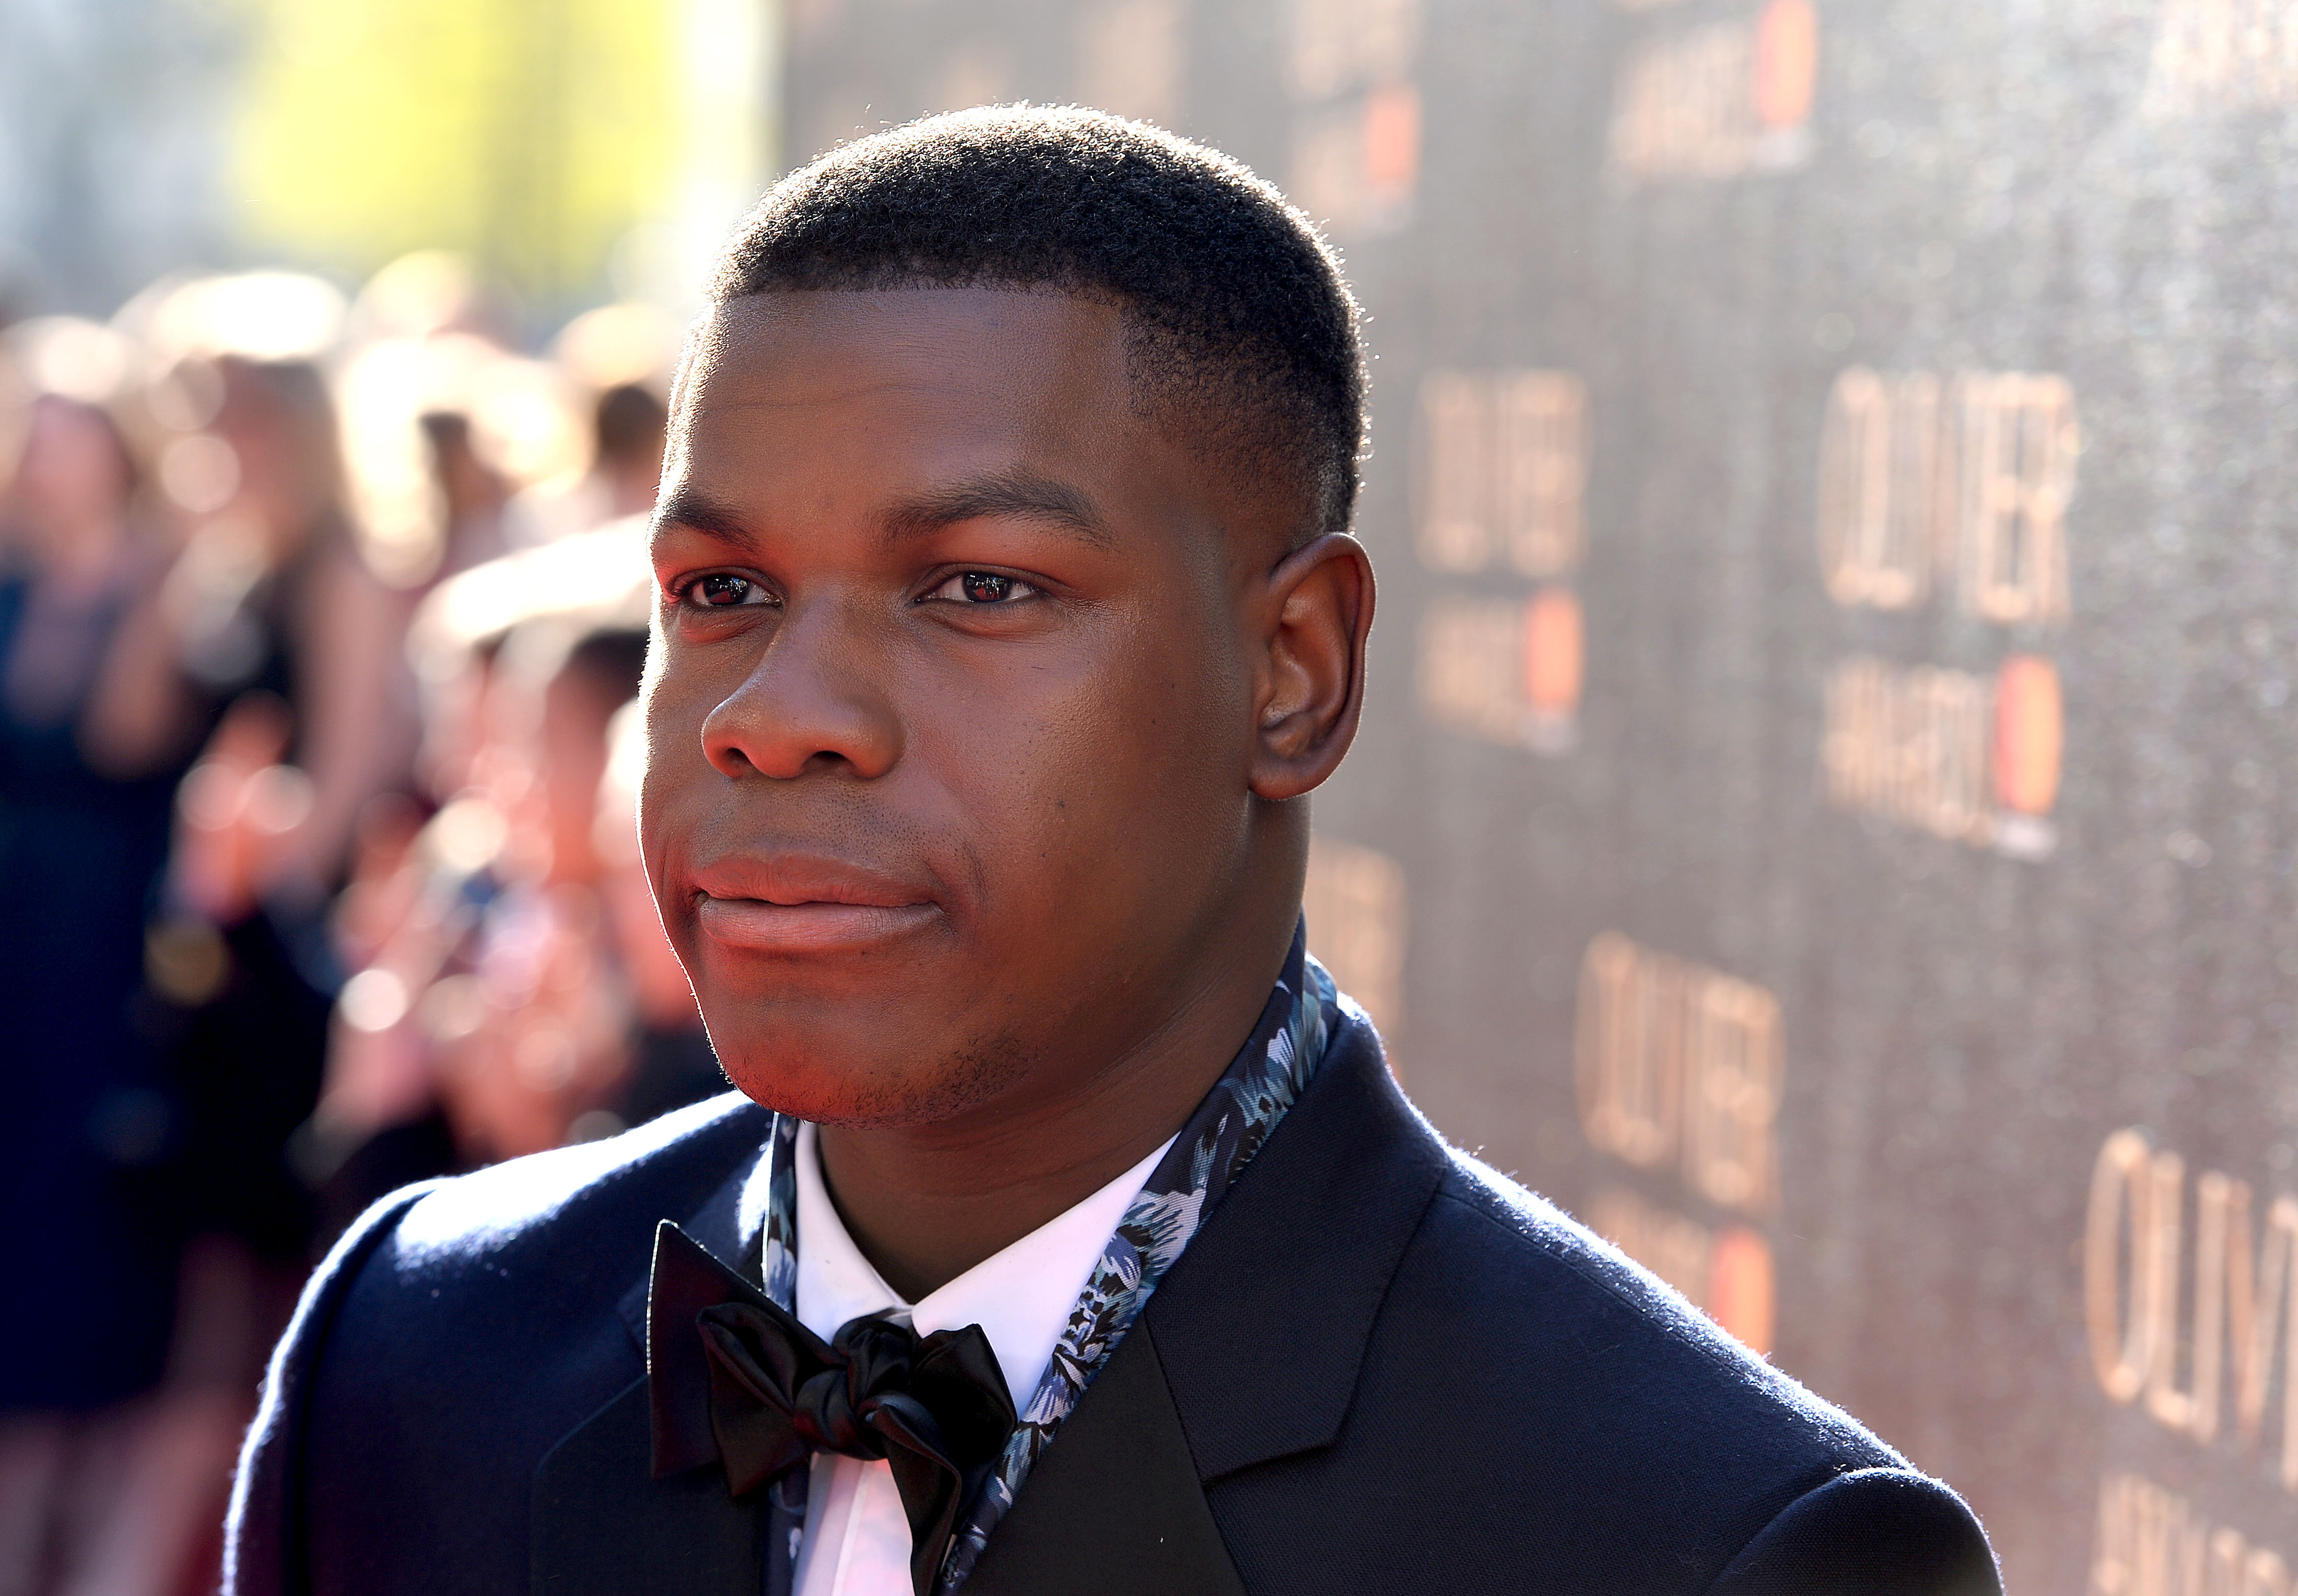 John Boyega attends The Olivier Awards 2017 at Royal Albert Hall on April 9, 2017 in London, England. (Jeff Spicer—Getty Images)